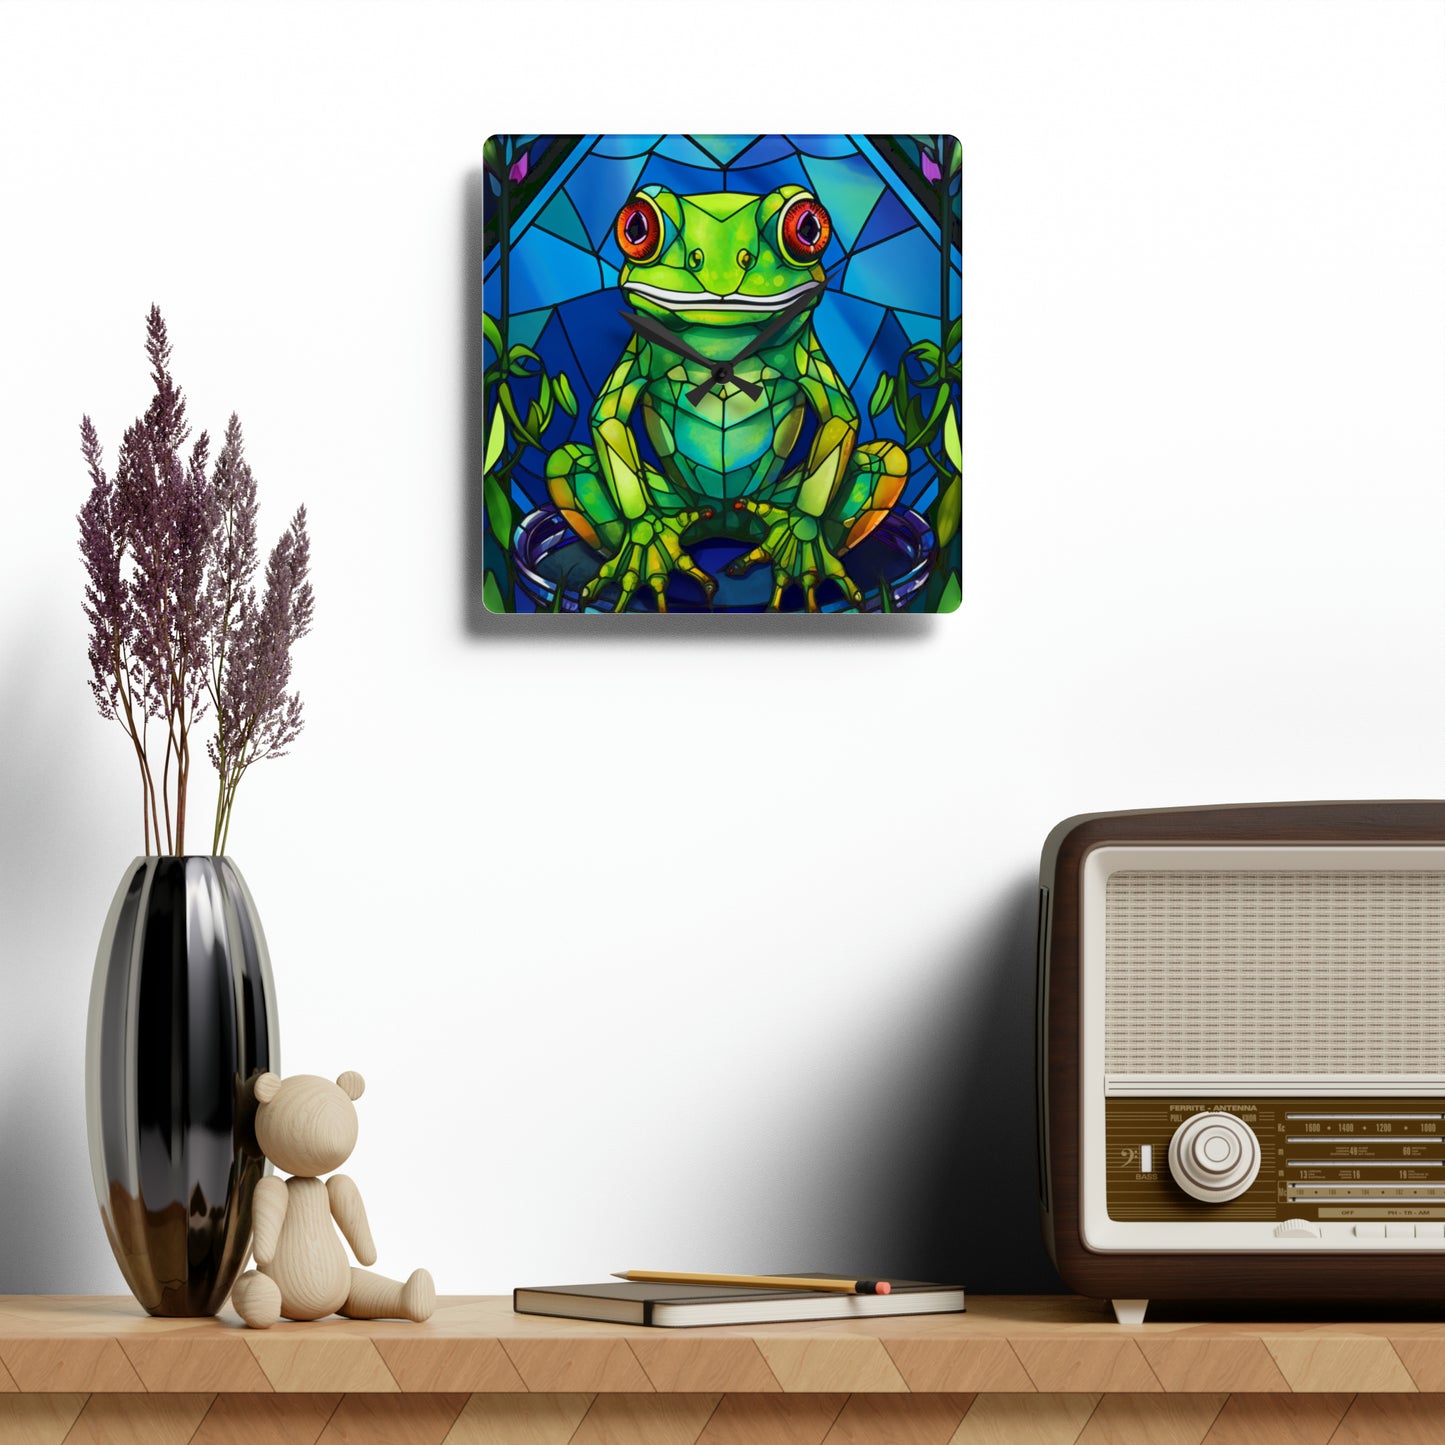 Stained Glass Frog Design - Acrylic Wall Clock